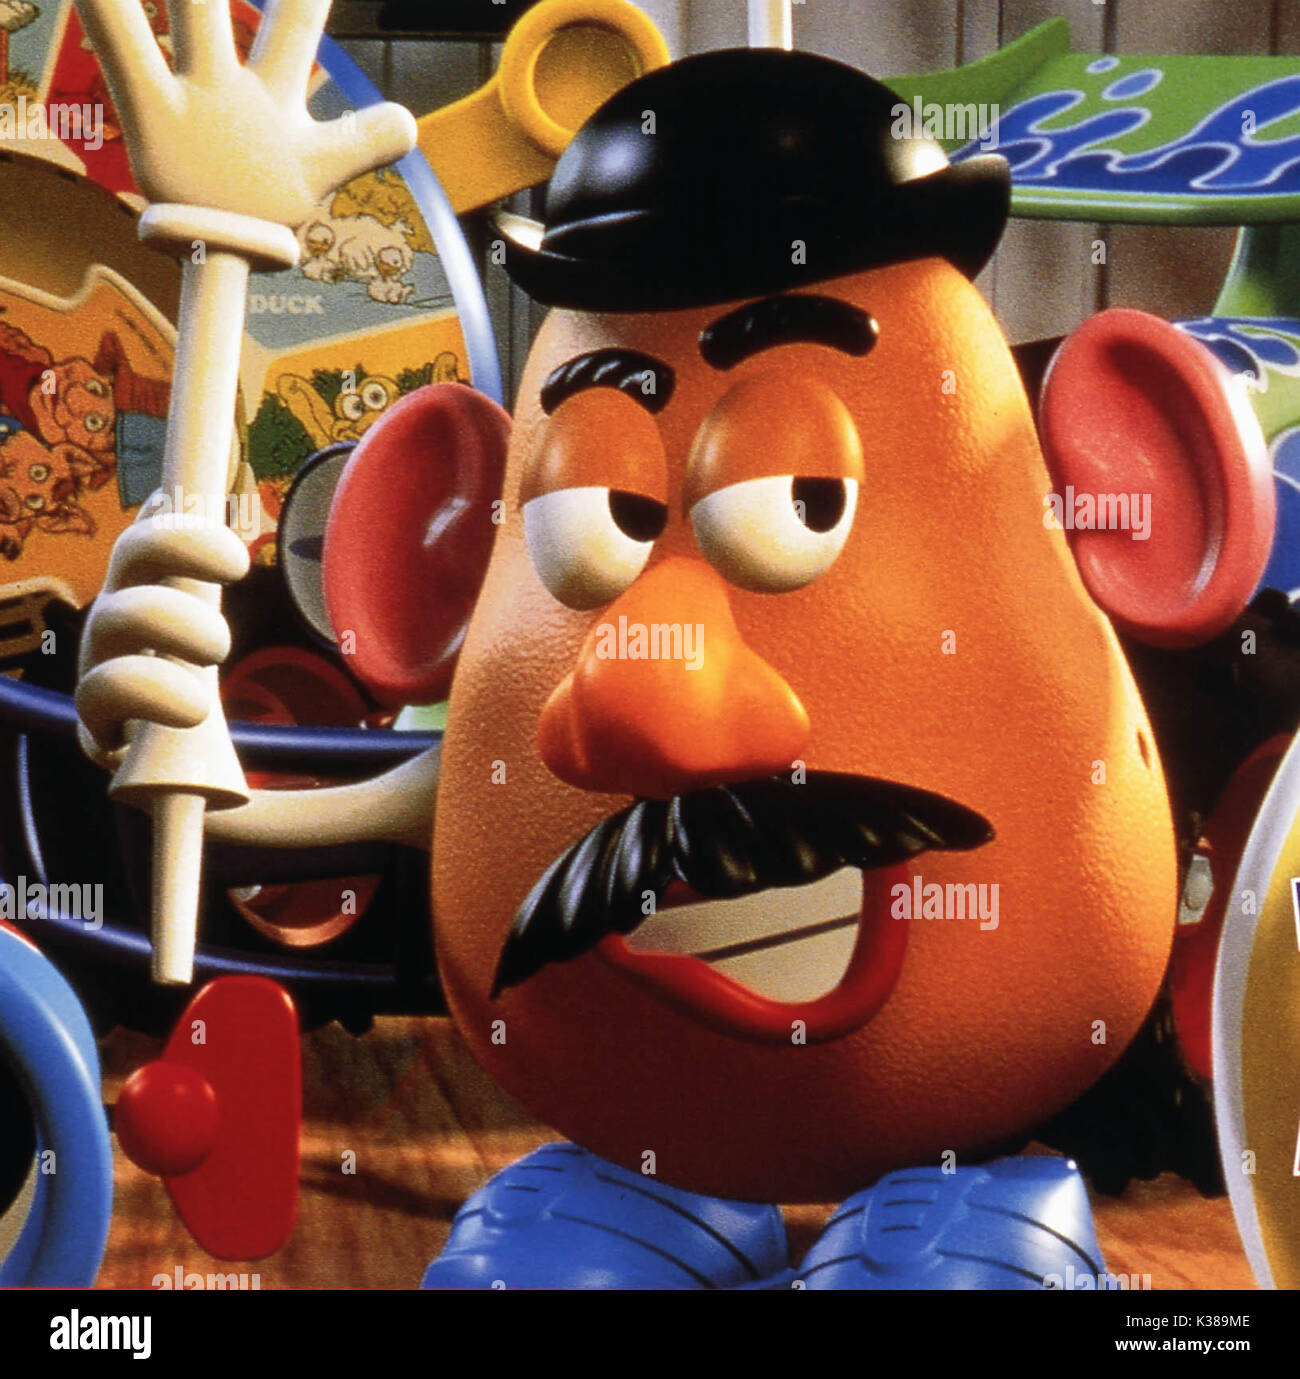 Toy Story Copyright Walt Disney Mr Potato Head Picture From The Ronald Grant Archive Toy Story Copyright Walt Disney Mr Potato Head Date 1995 Stock Photo Alamy